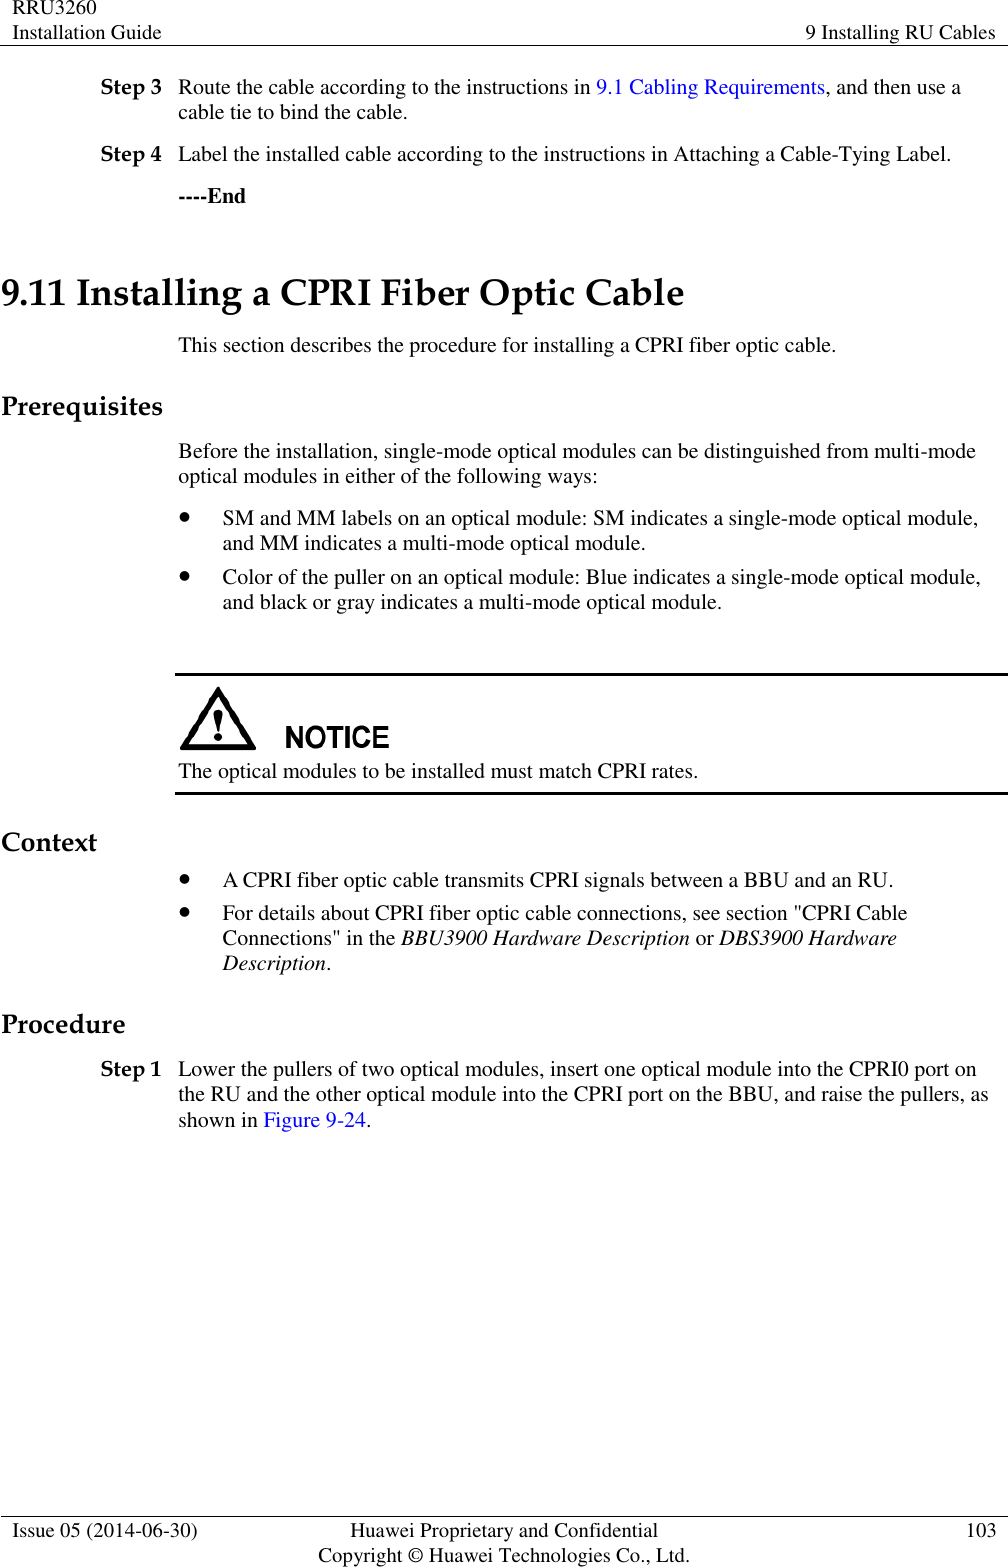 RRU3260 Installation Guide 9 Installing RU Cables  Issue 05 (2014-06-30) Huawei Proprietary and Confidential                                     Copyright © Huawei Technologies Co., Ltd. 103  Step 3 Route the cable according to the instructions in 9.1 Cabling Requirements, and then use a cable tie to bind the cable. Step 4 Label the installed cable according to the instructions in Attaching a Cable-Tying Label. ----End 9.11 Installing a CPRI Fiber Optic Cable This section describes the procedure for installing a CPRI fiber optic cable. Prerequisites Before the installation, single-mode optical modules can be distinguished from multi-mode optical modules in either of the following ways:  SM and MM labels on an optical module: SM indicates a single-mode optical module, and MM indicates a multi-mode optical module.  Color of the puller on an optical module: Blue indicates a single-mode optical module, and black or gray indicates a multi-mode optical module.   The optical modules to be installed must match CPRI rates. Context  A CPRI fiber optic cable transmits CPRI signals between a BBU and an RU.  For details about CPRI fiber optic cable connections, see section &quot;CPRI Cable Connections&quot; in the BBU3900 Hardware Description or DBS3900 Hardware Description. Procedure Step 1 Lower the pullers of two optical modules, insert one optical module into the CPRI0 port on the RU and the other optical module into the CPRI port on the BBU, and raise the pullers, as shown in Figure 9-24. 